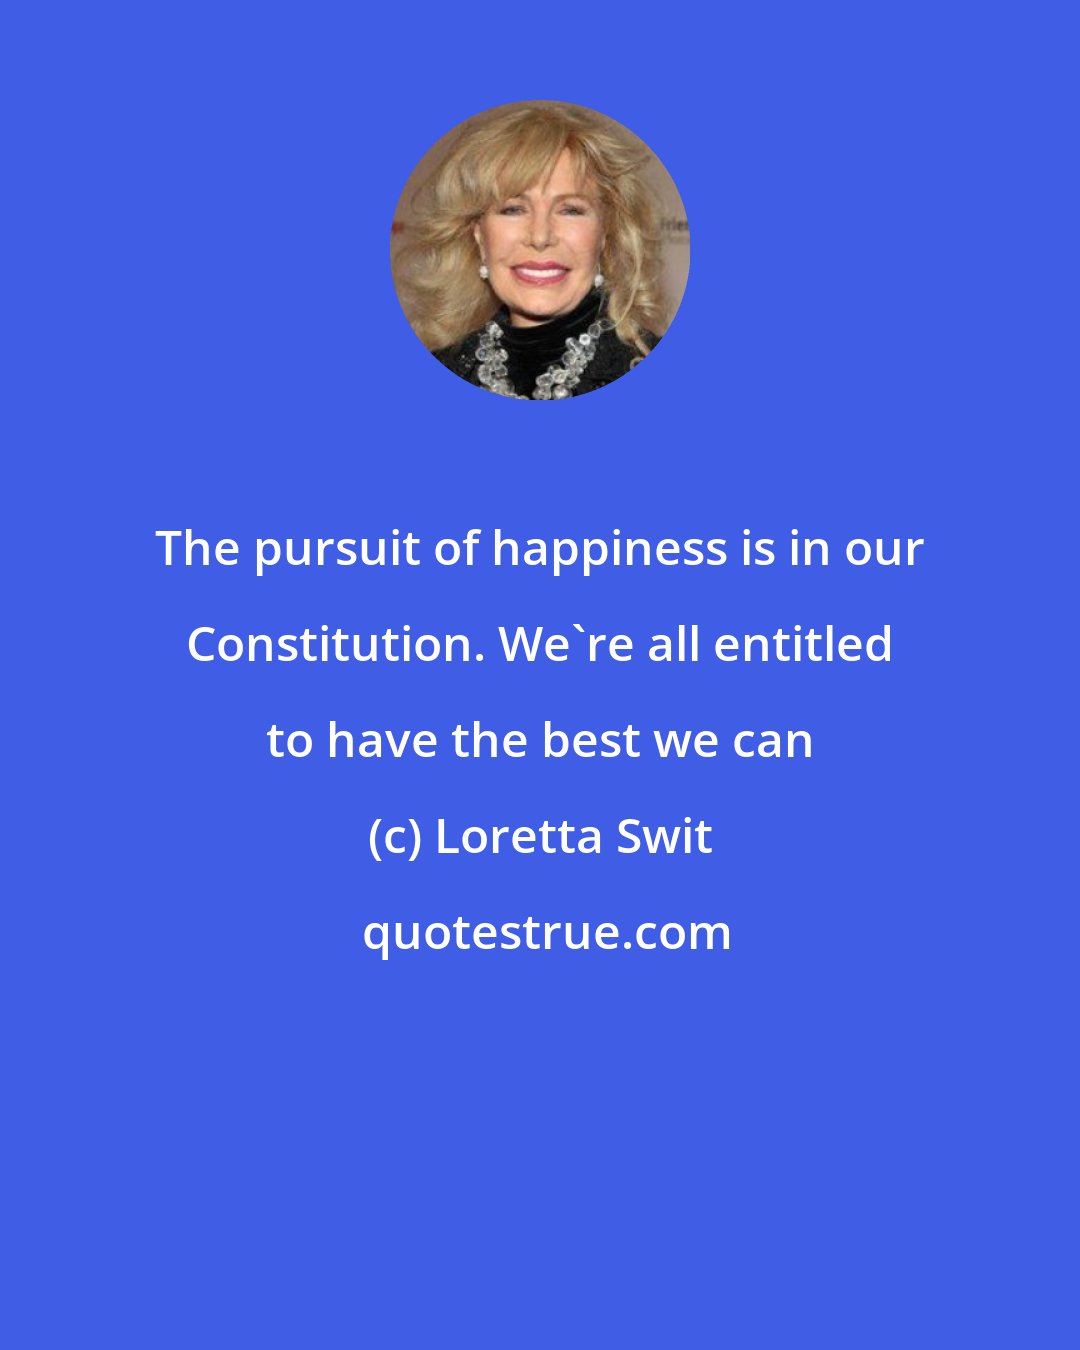 Loretta Swit: The pursuit of happiness is in our Constitution. We're all entitled to have the best we can